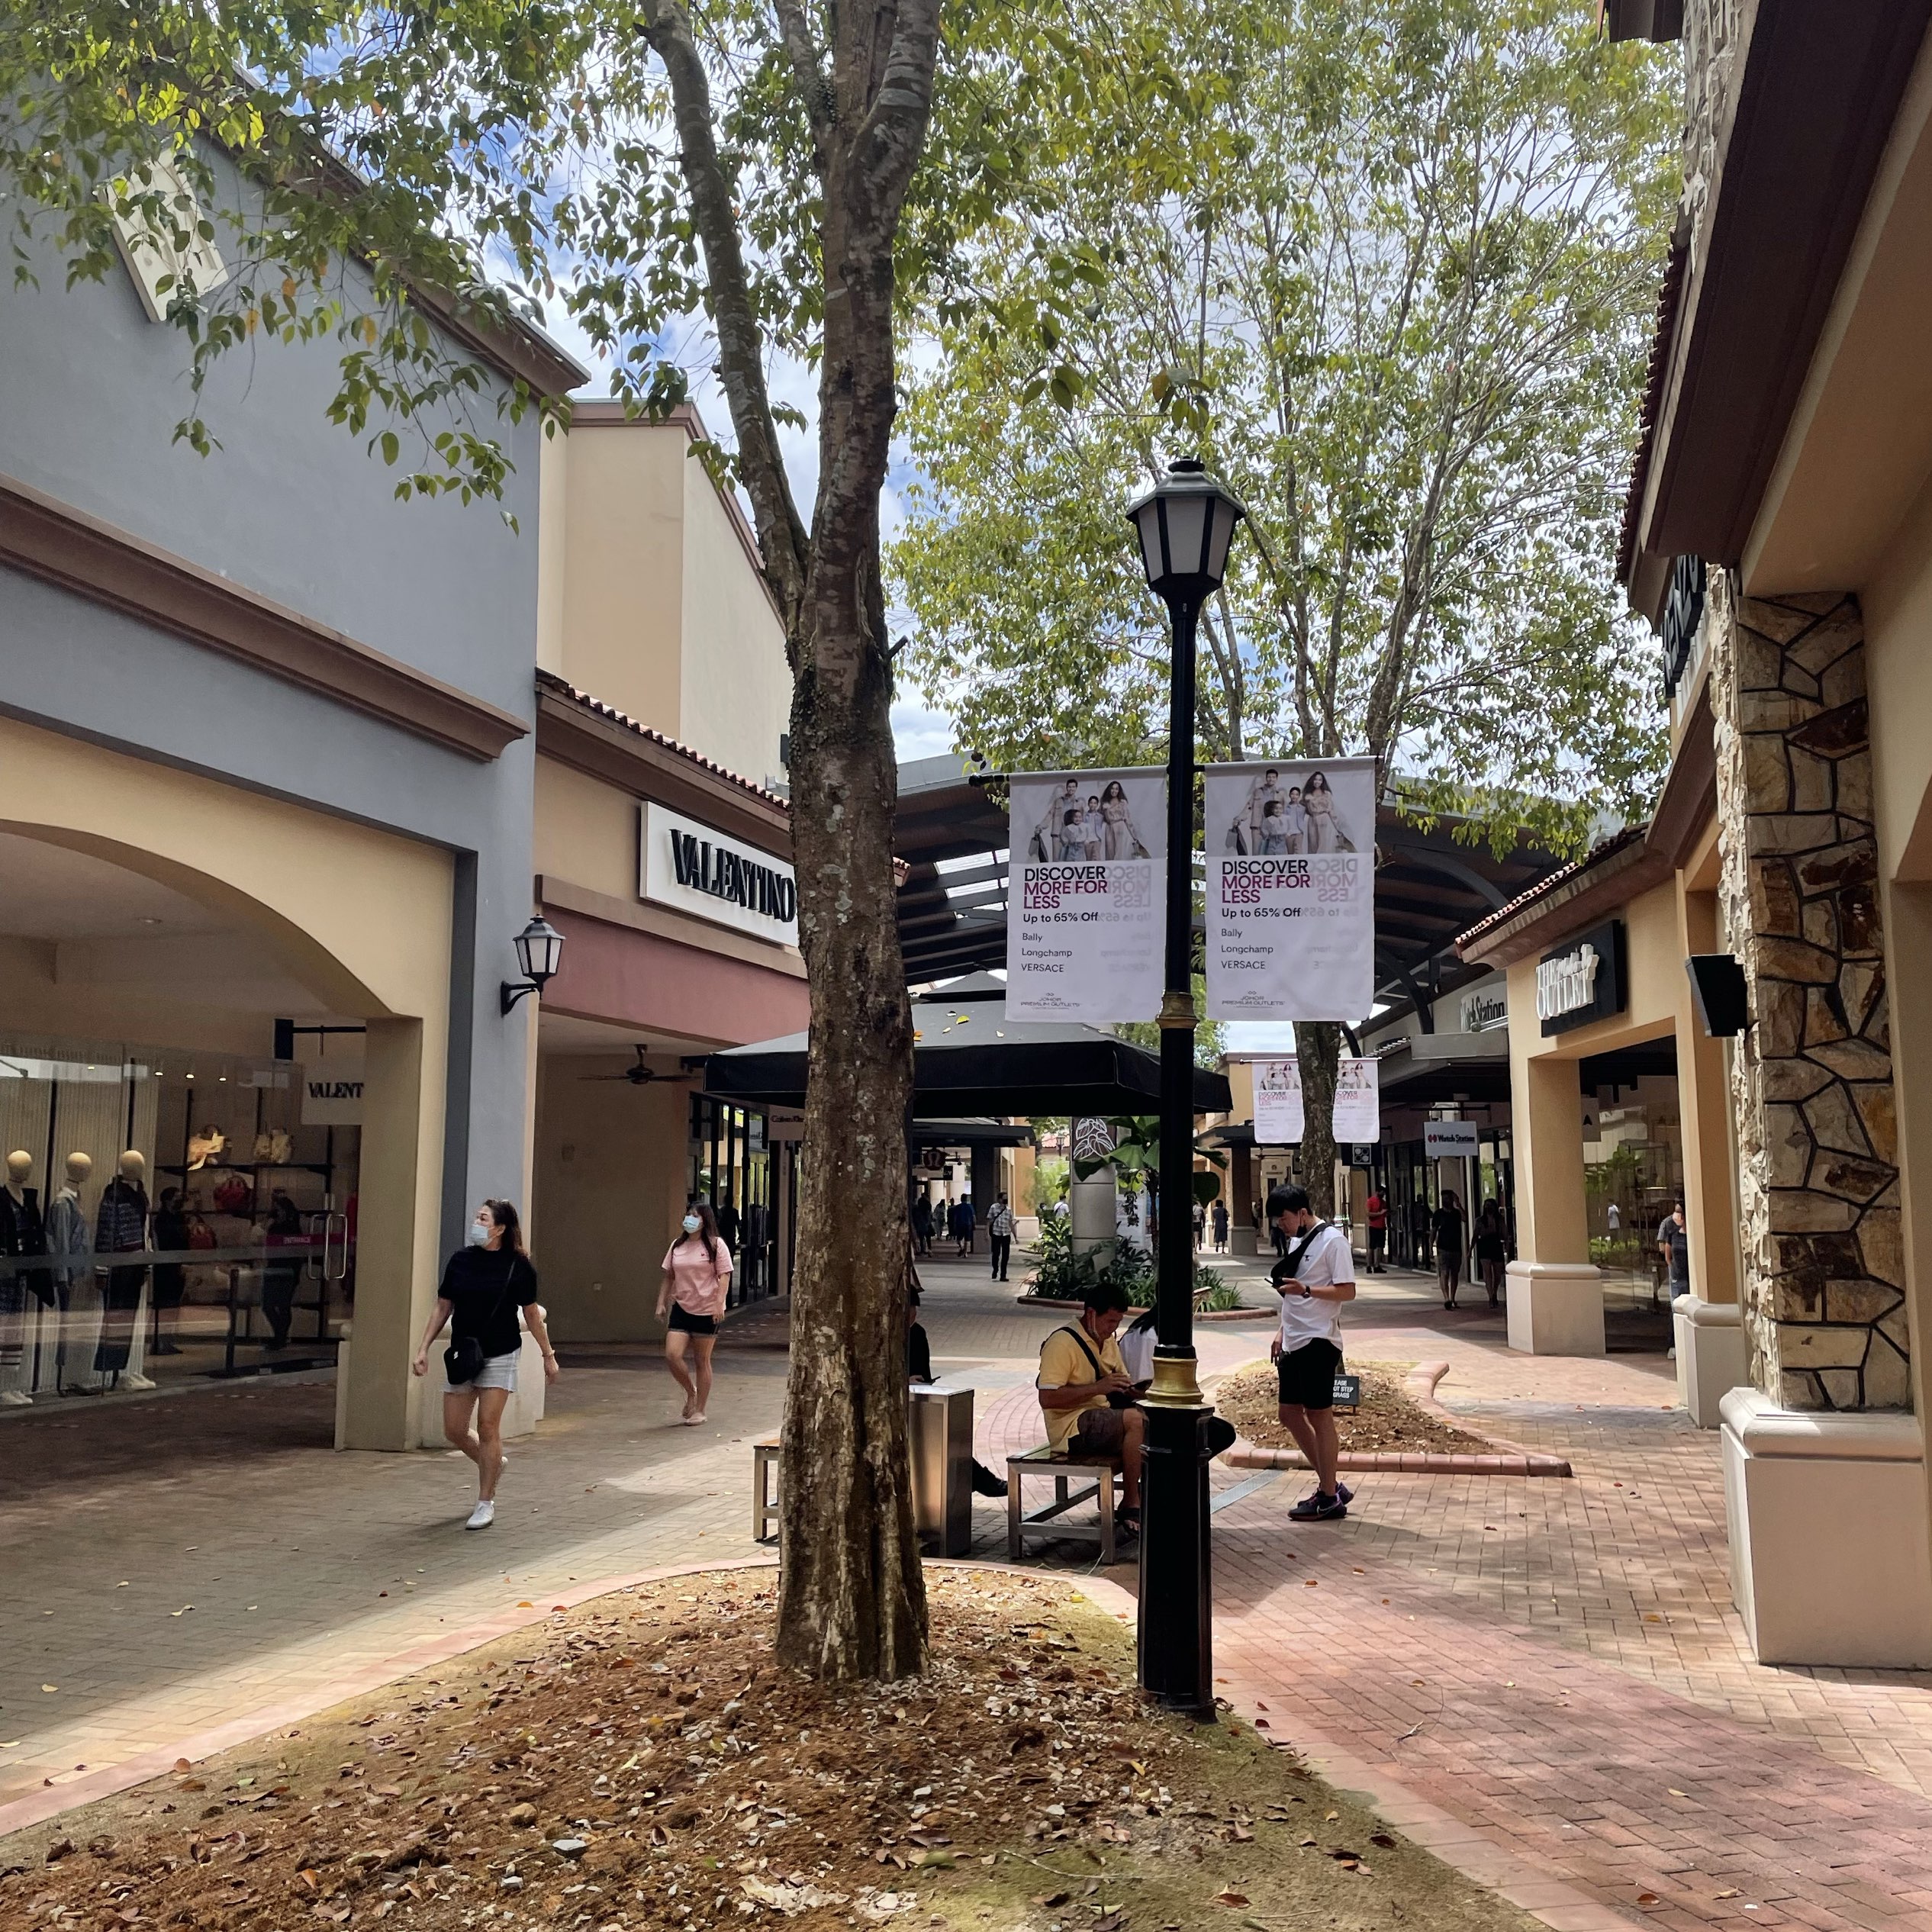 Malaysia Johor Premium Outlets - Shopping heaven, My cancel…